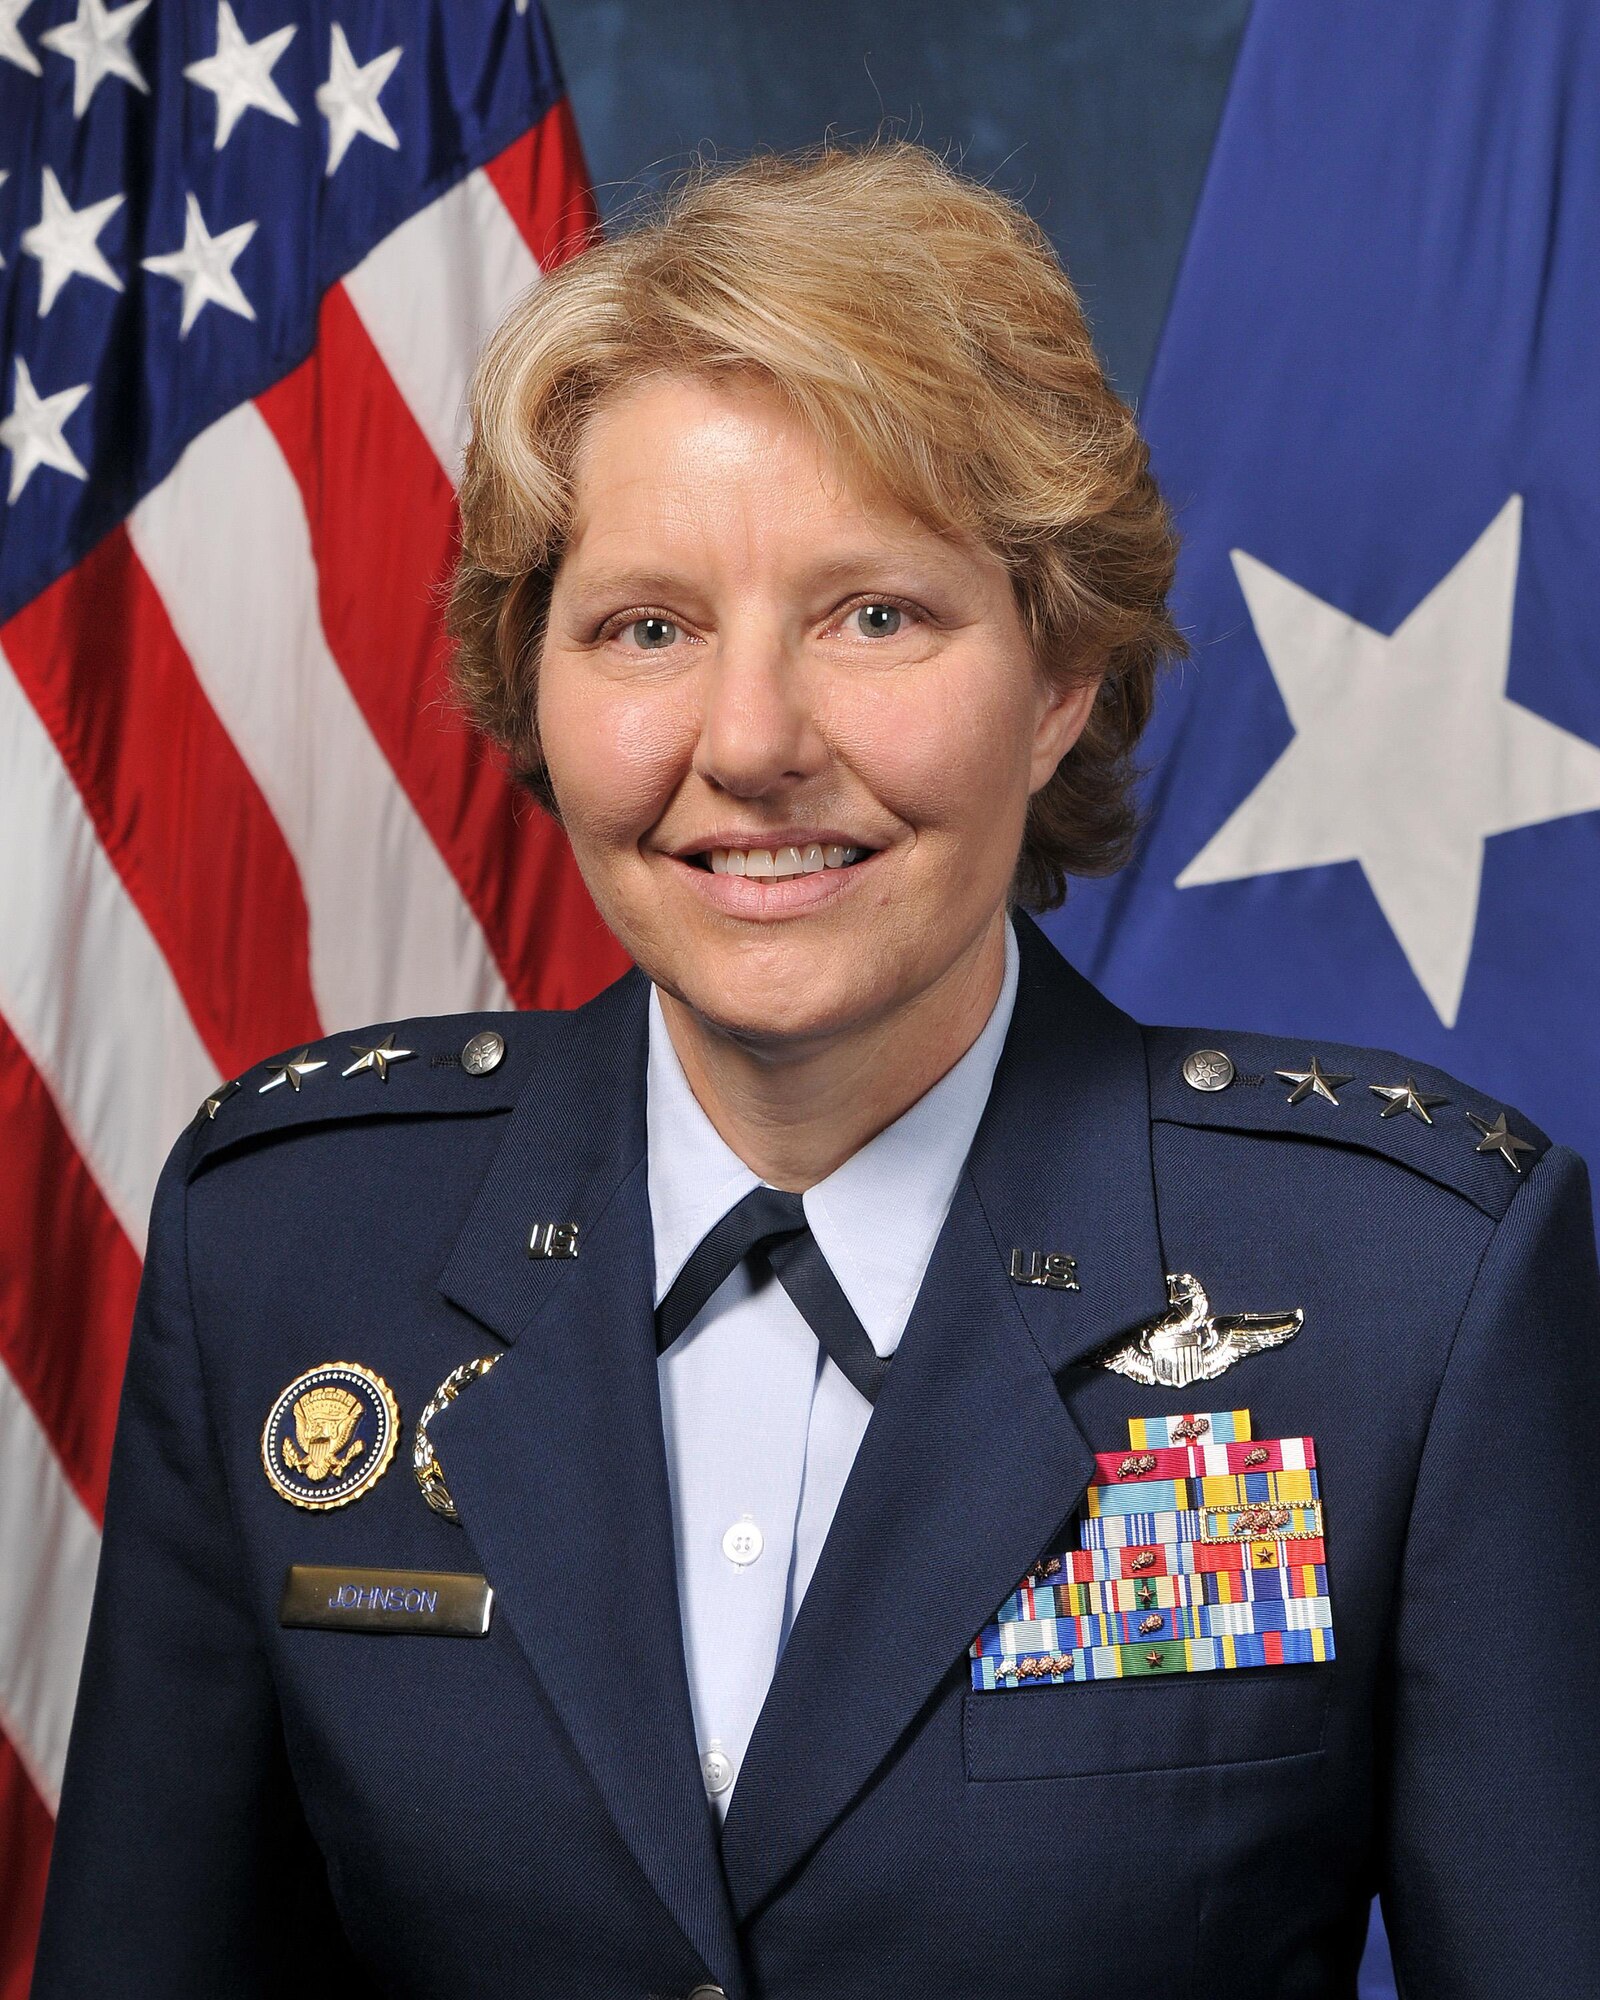 Lt. Gen. Michelle D. Johnson, the superintendent of the U.S. Air Force Academy. (U.S. Air Force photo)